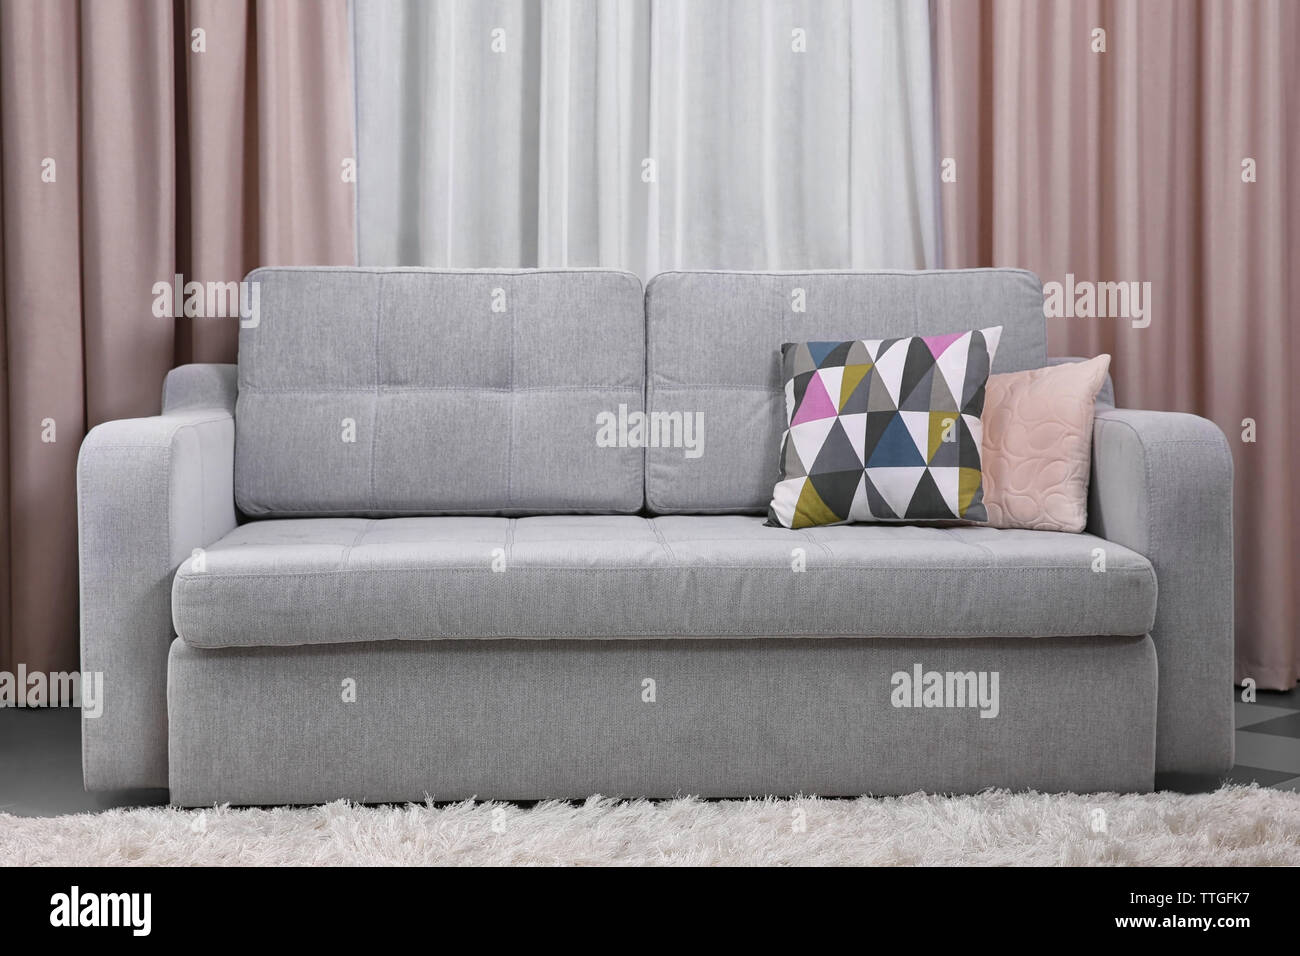 Grey sofa against curtains in the room Stock Photo - Alamy